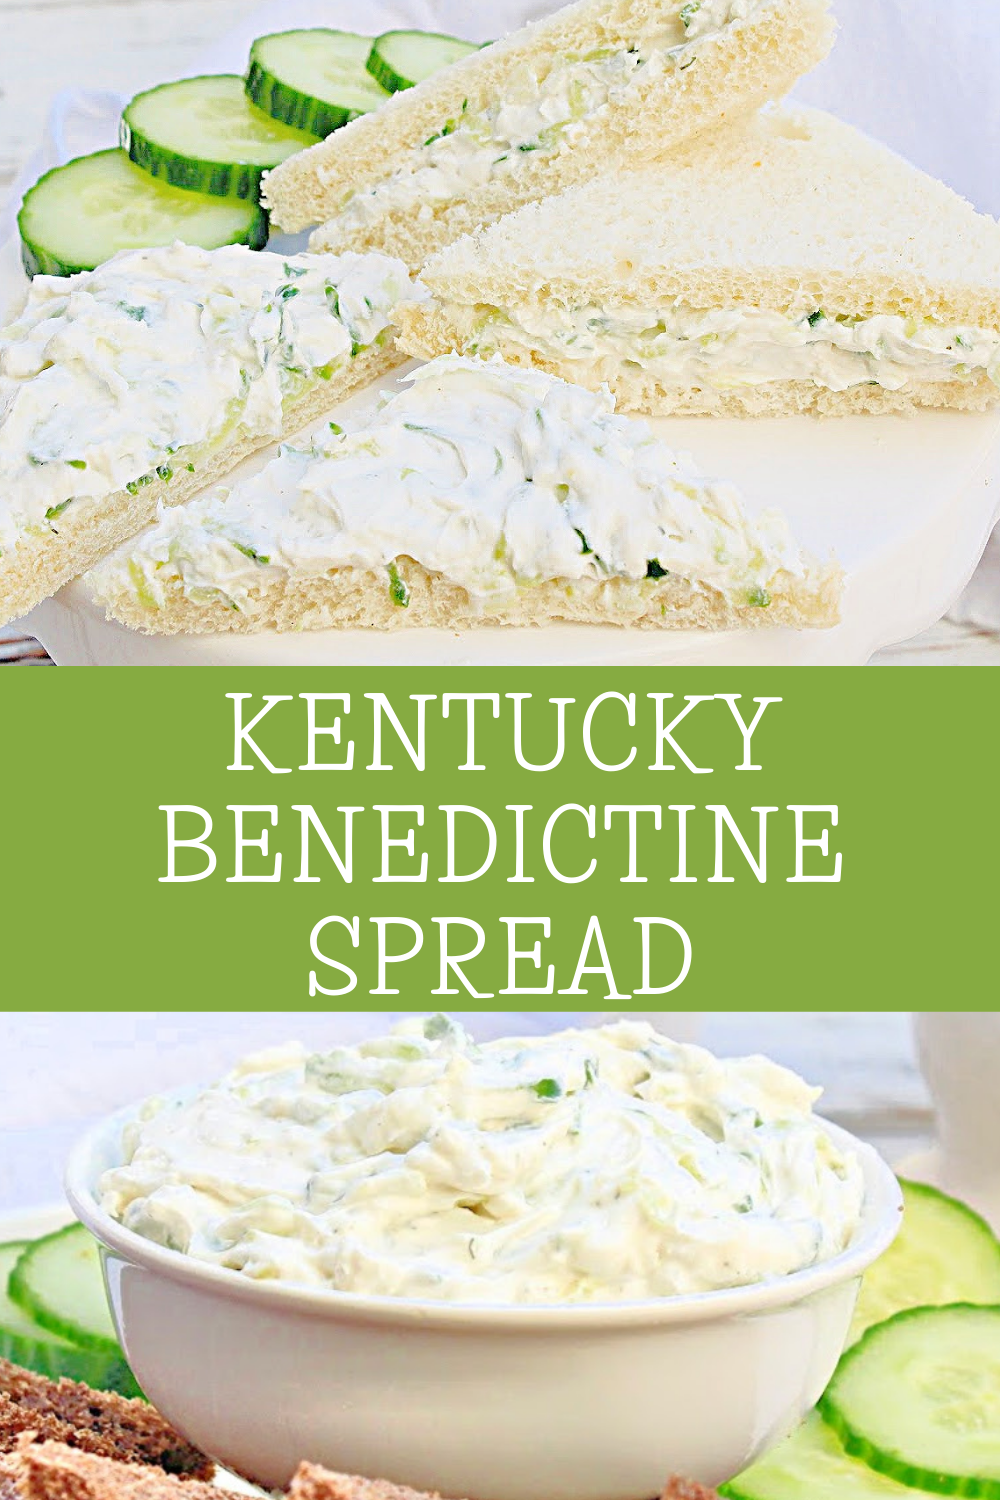 Benedictine Spread ~ This classic Kentucky cucumber dip adds plant-based Southern style to your Derby party or afternoon teatime! via @thiswifecooks